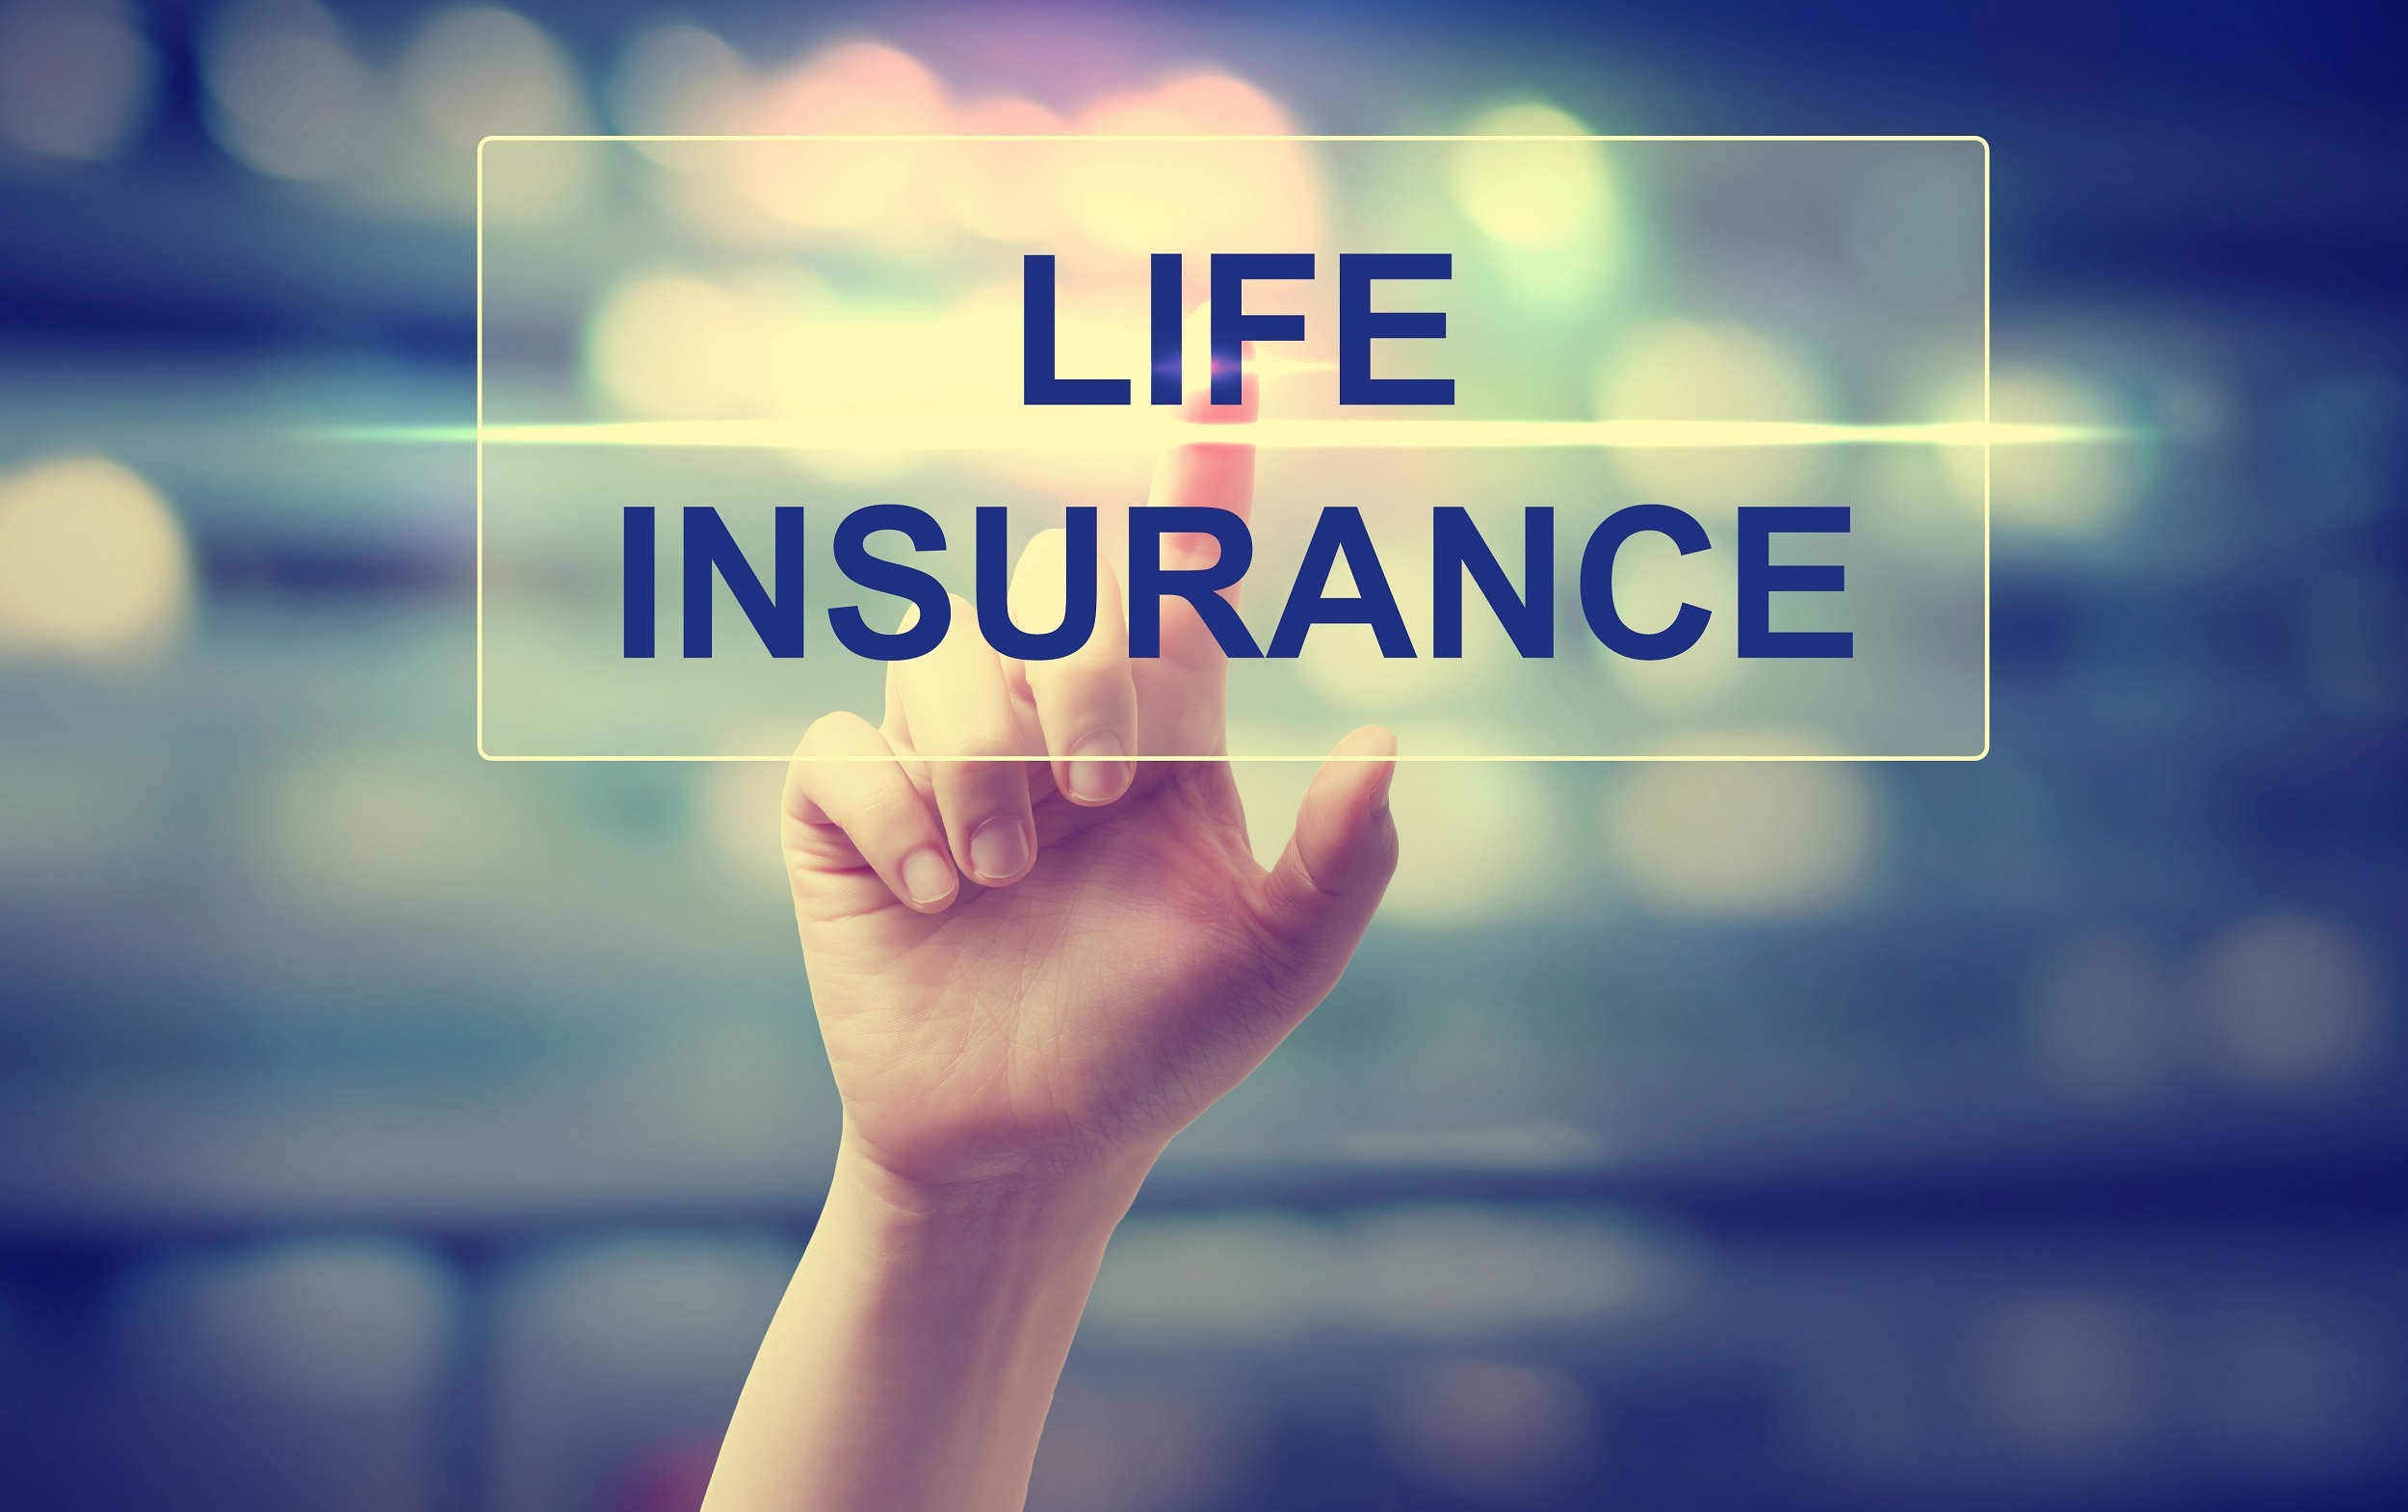 Best Life Insurance for Business Owners